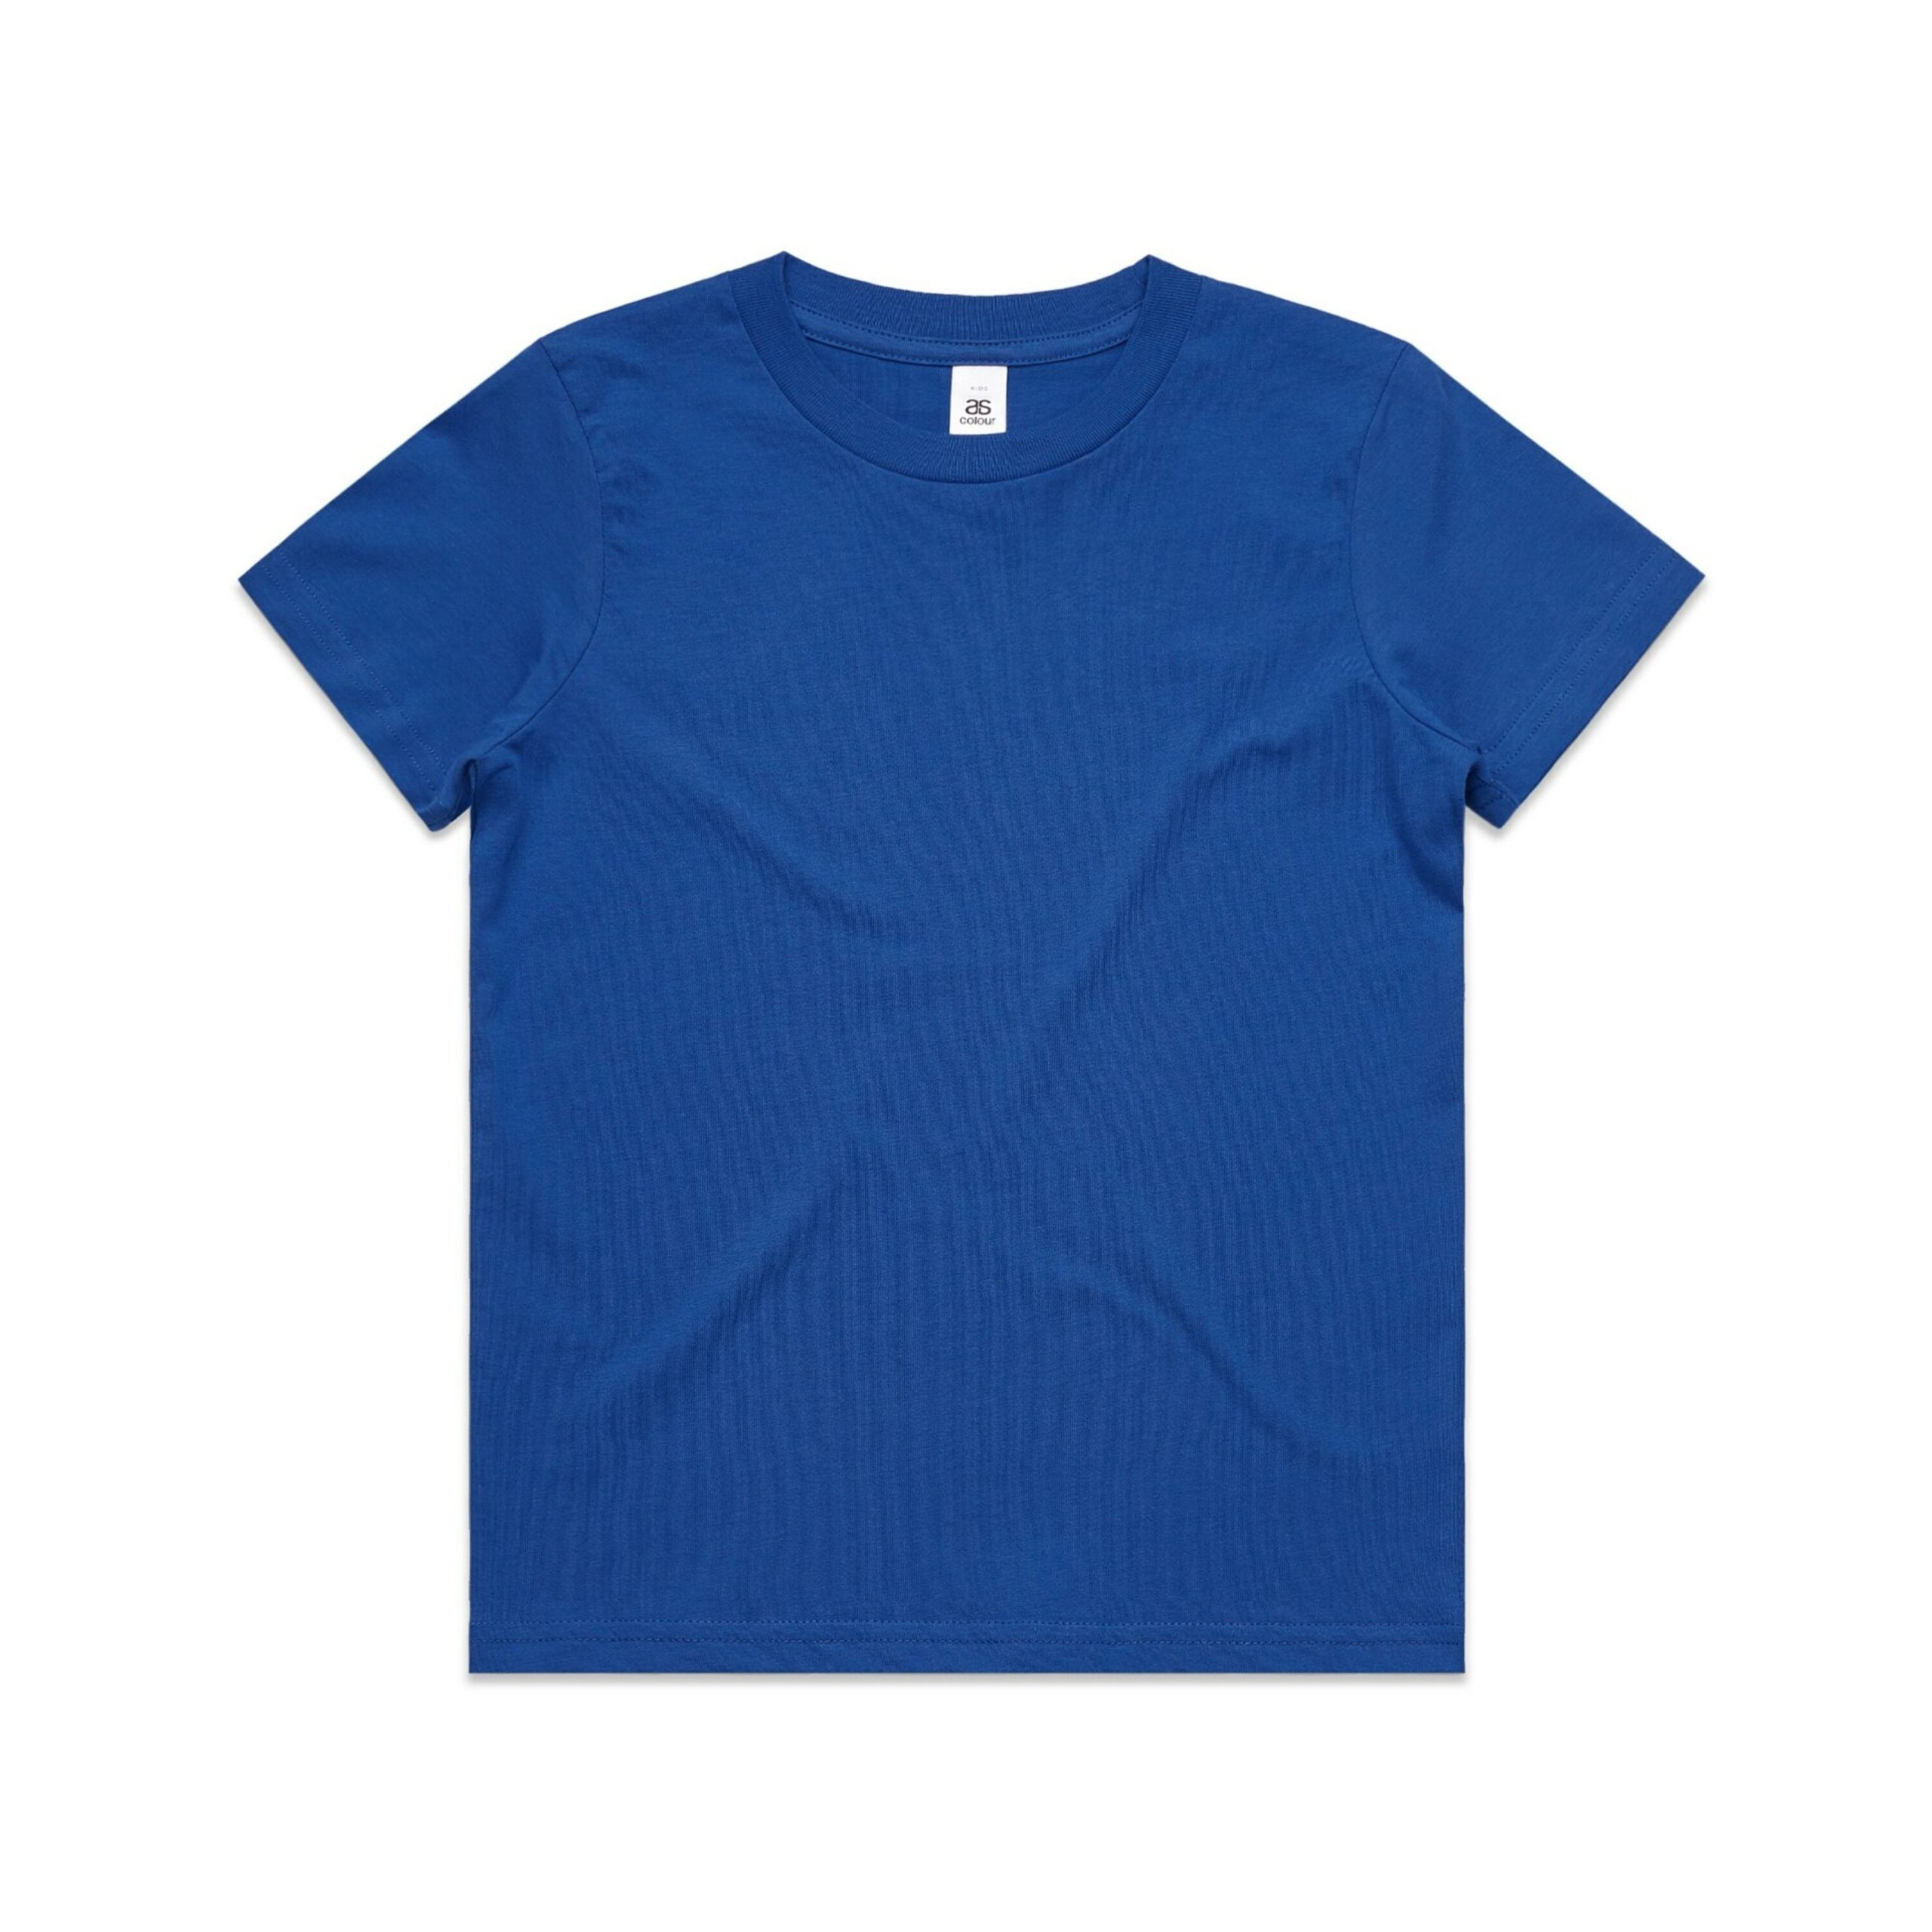 3005_AS_Kids-Tee_Bright-Royal-scaled